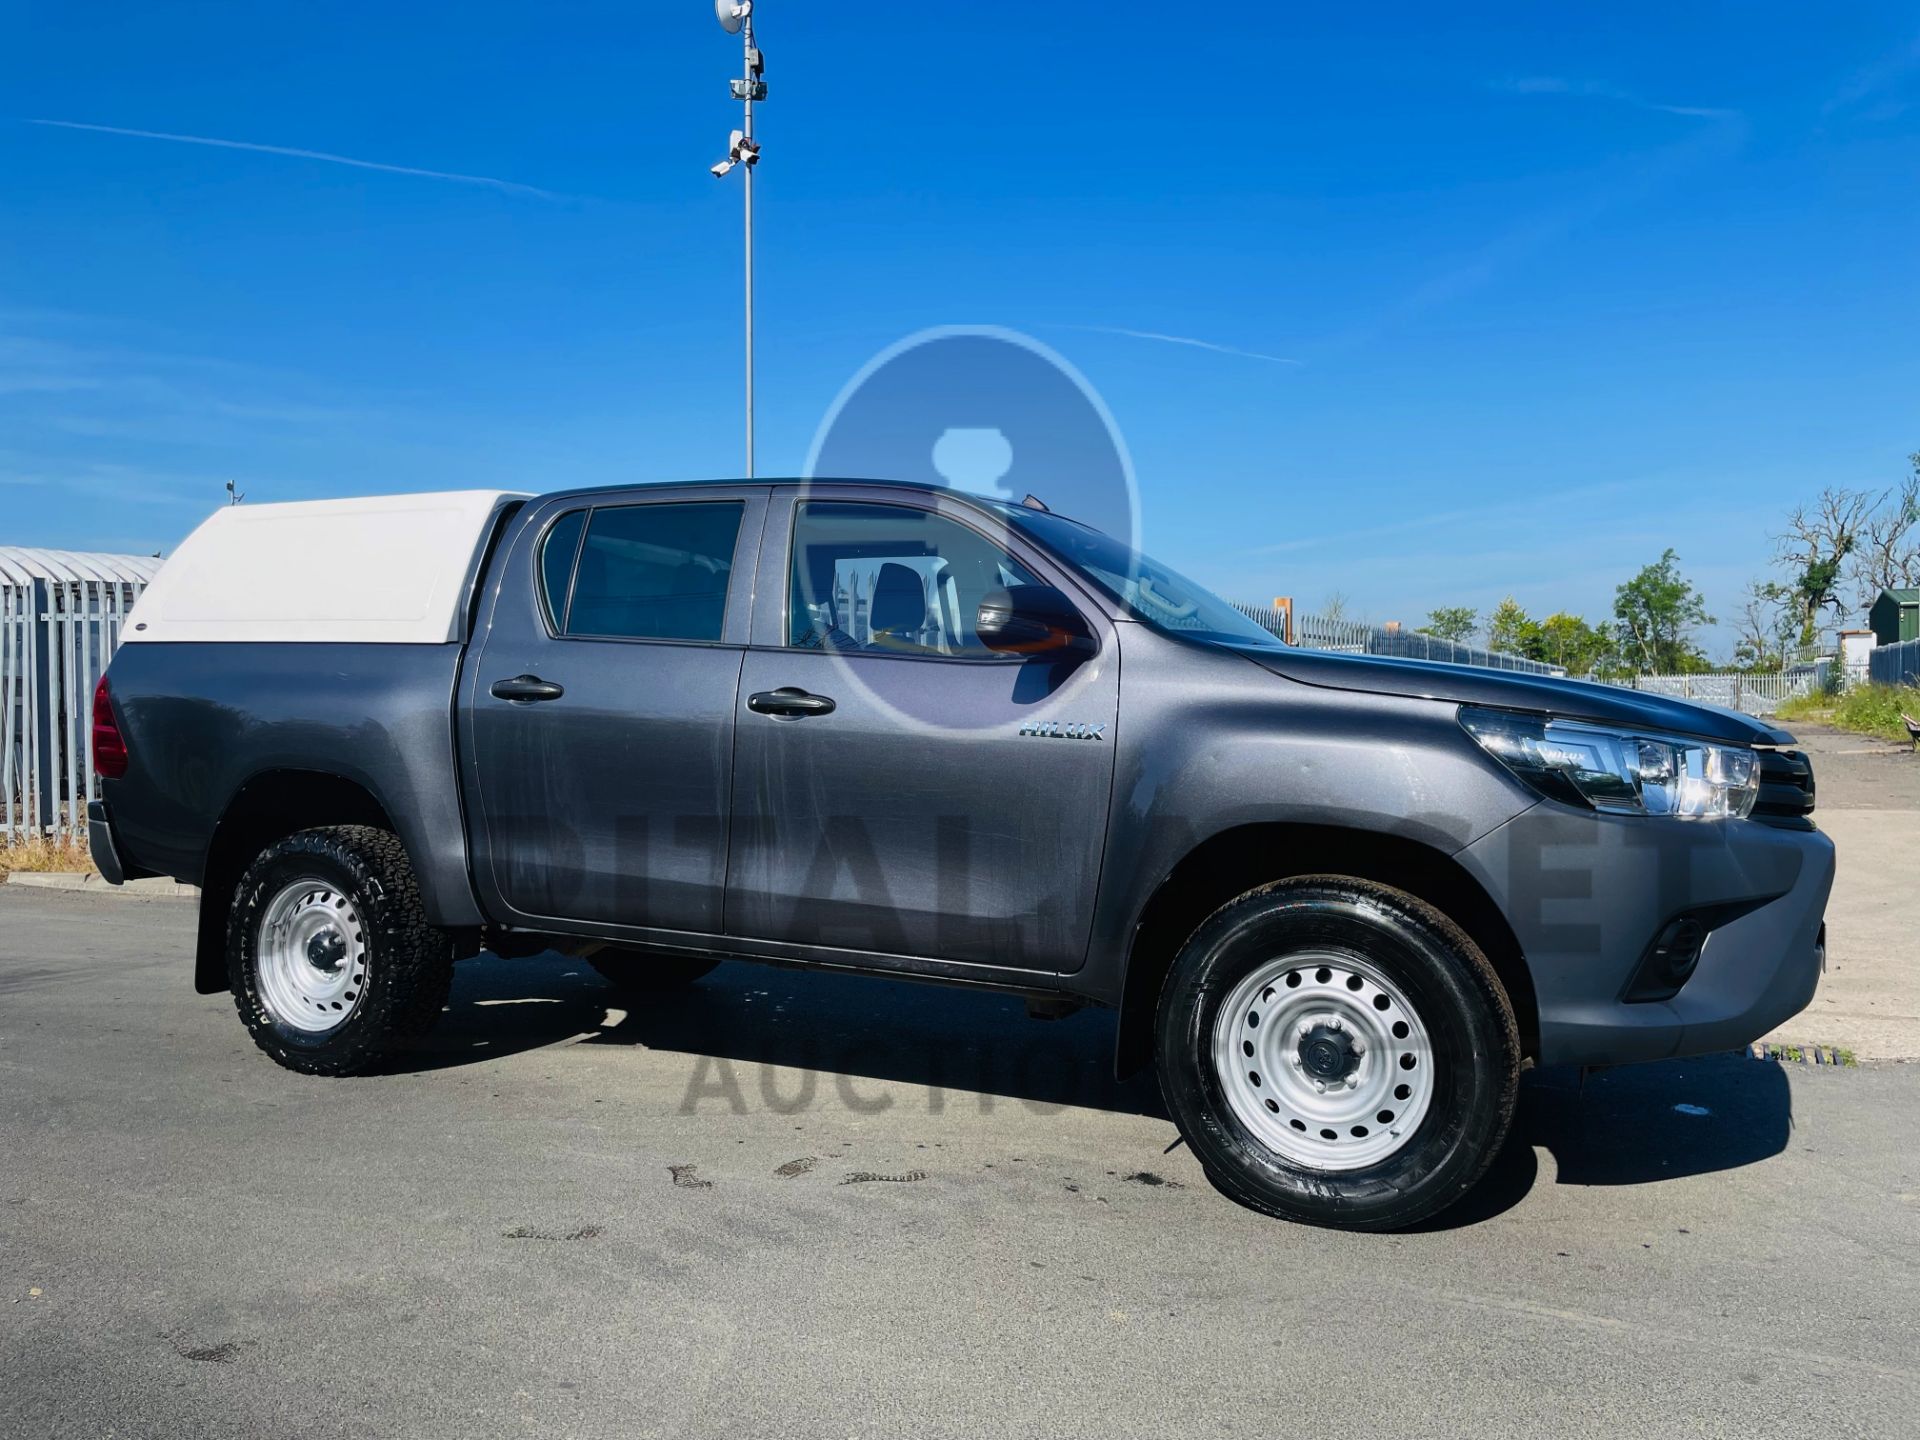 (On Sale) TOYOTA HILUX *DOUBLE CAB PICK-UP* (2018 - EURO 6) 2.4 D-4D - 6 SPEED *ONLY 52,000 MILES* - Image 2 of 43